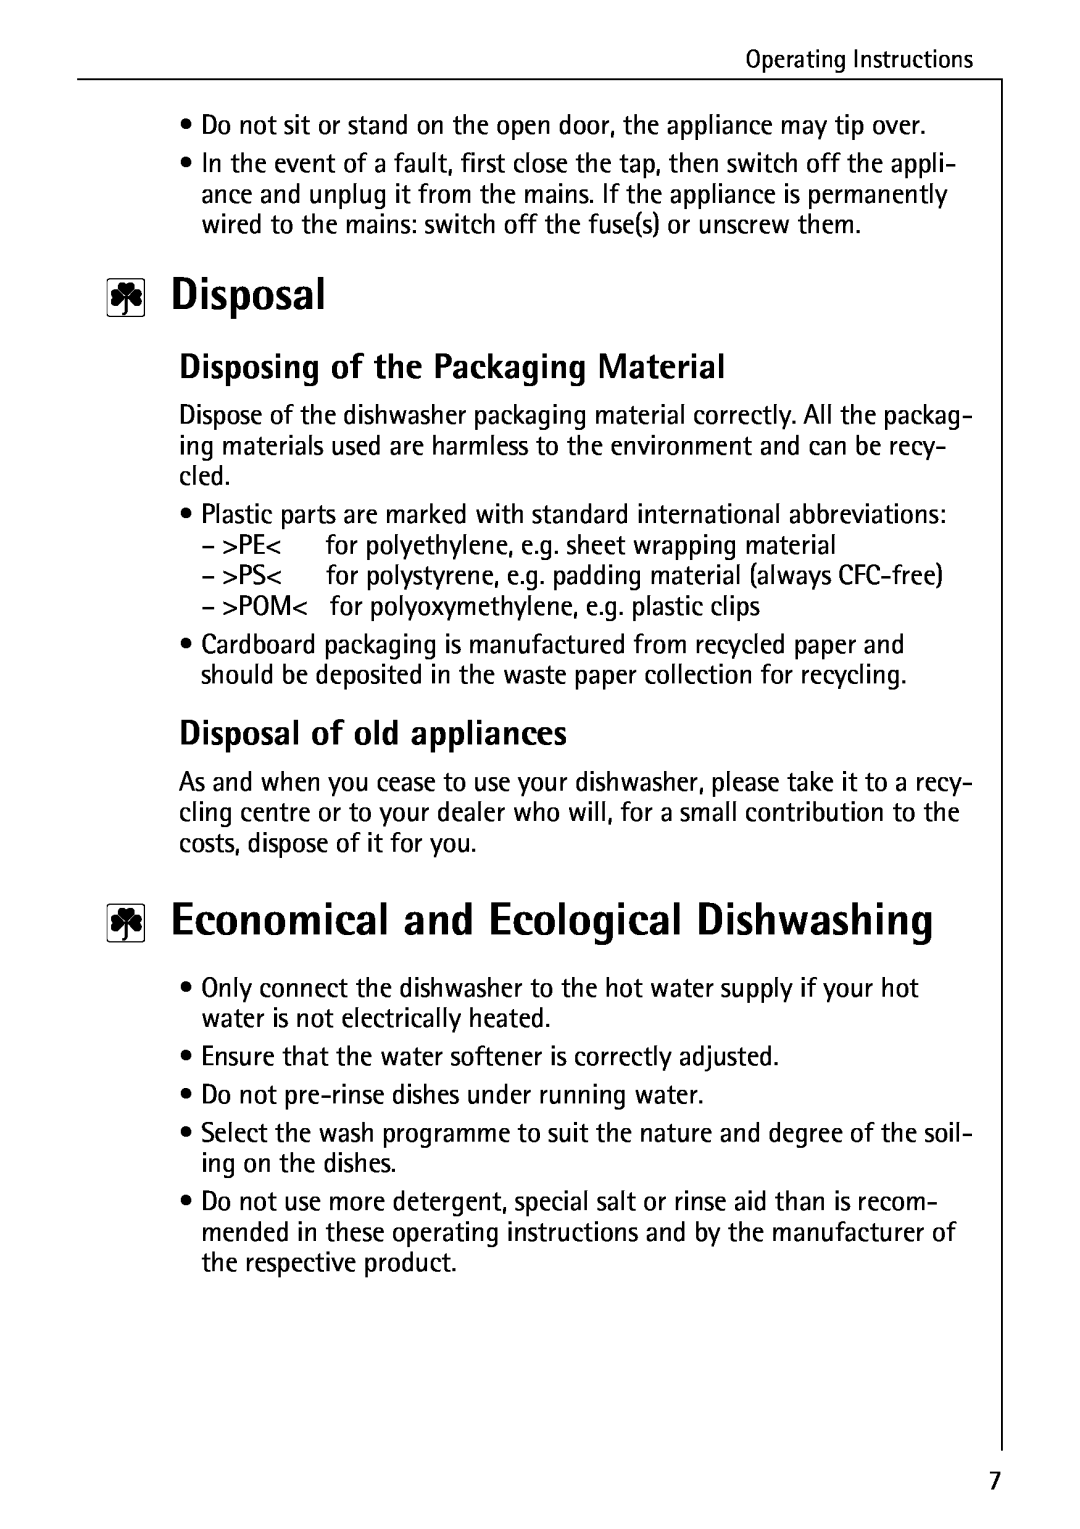 AEG 40260 I manual Disposal, Economical and Ecological Dishwashing, Disposing of the Packaging Material 